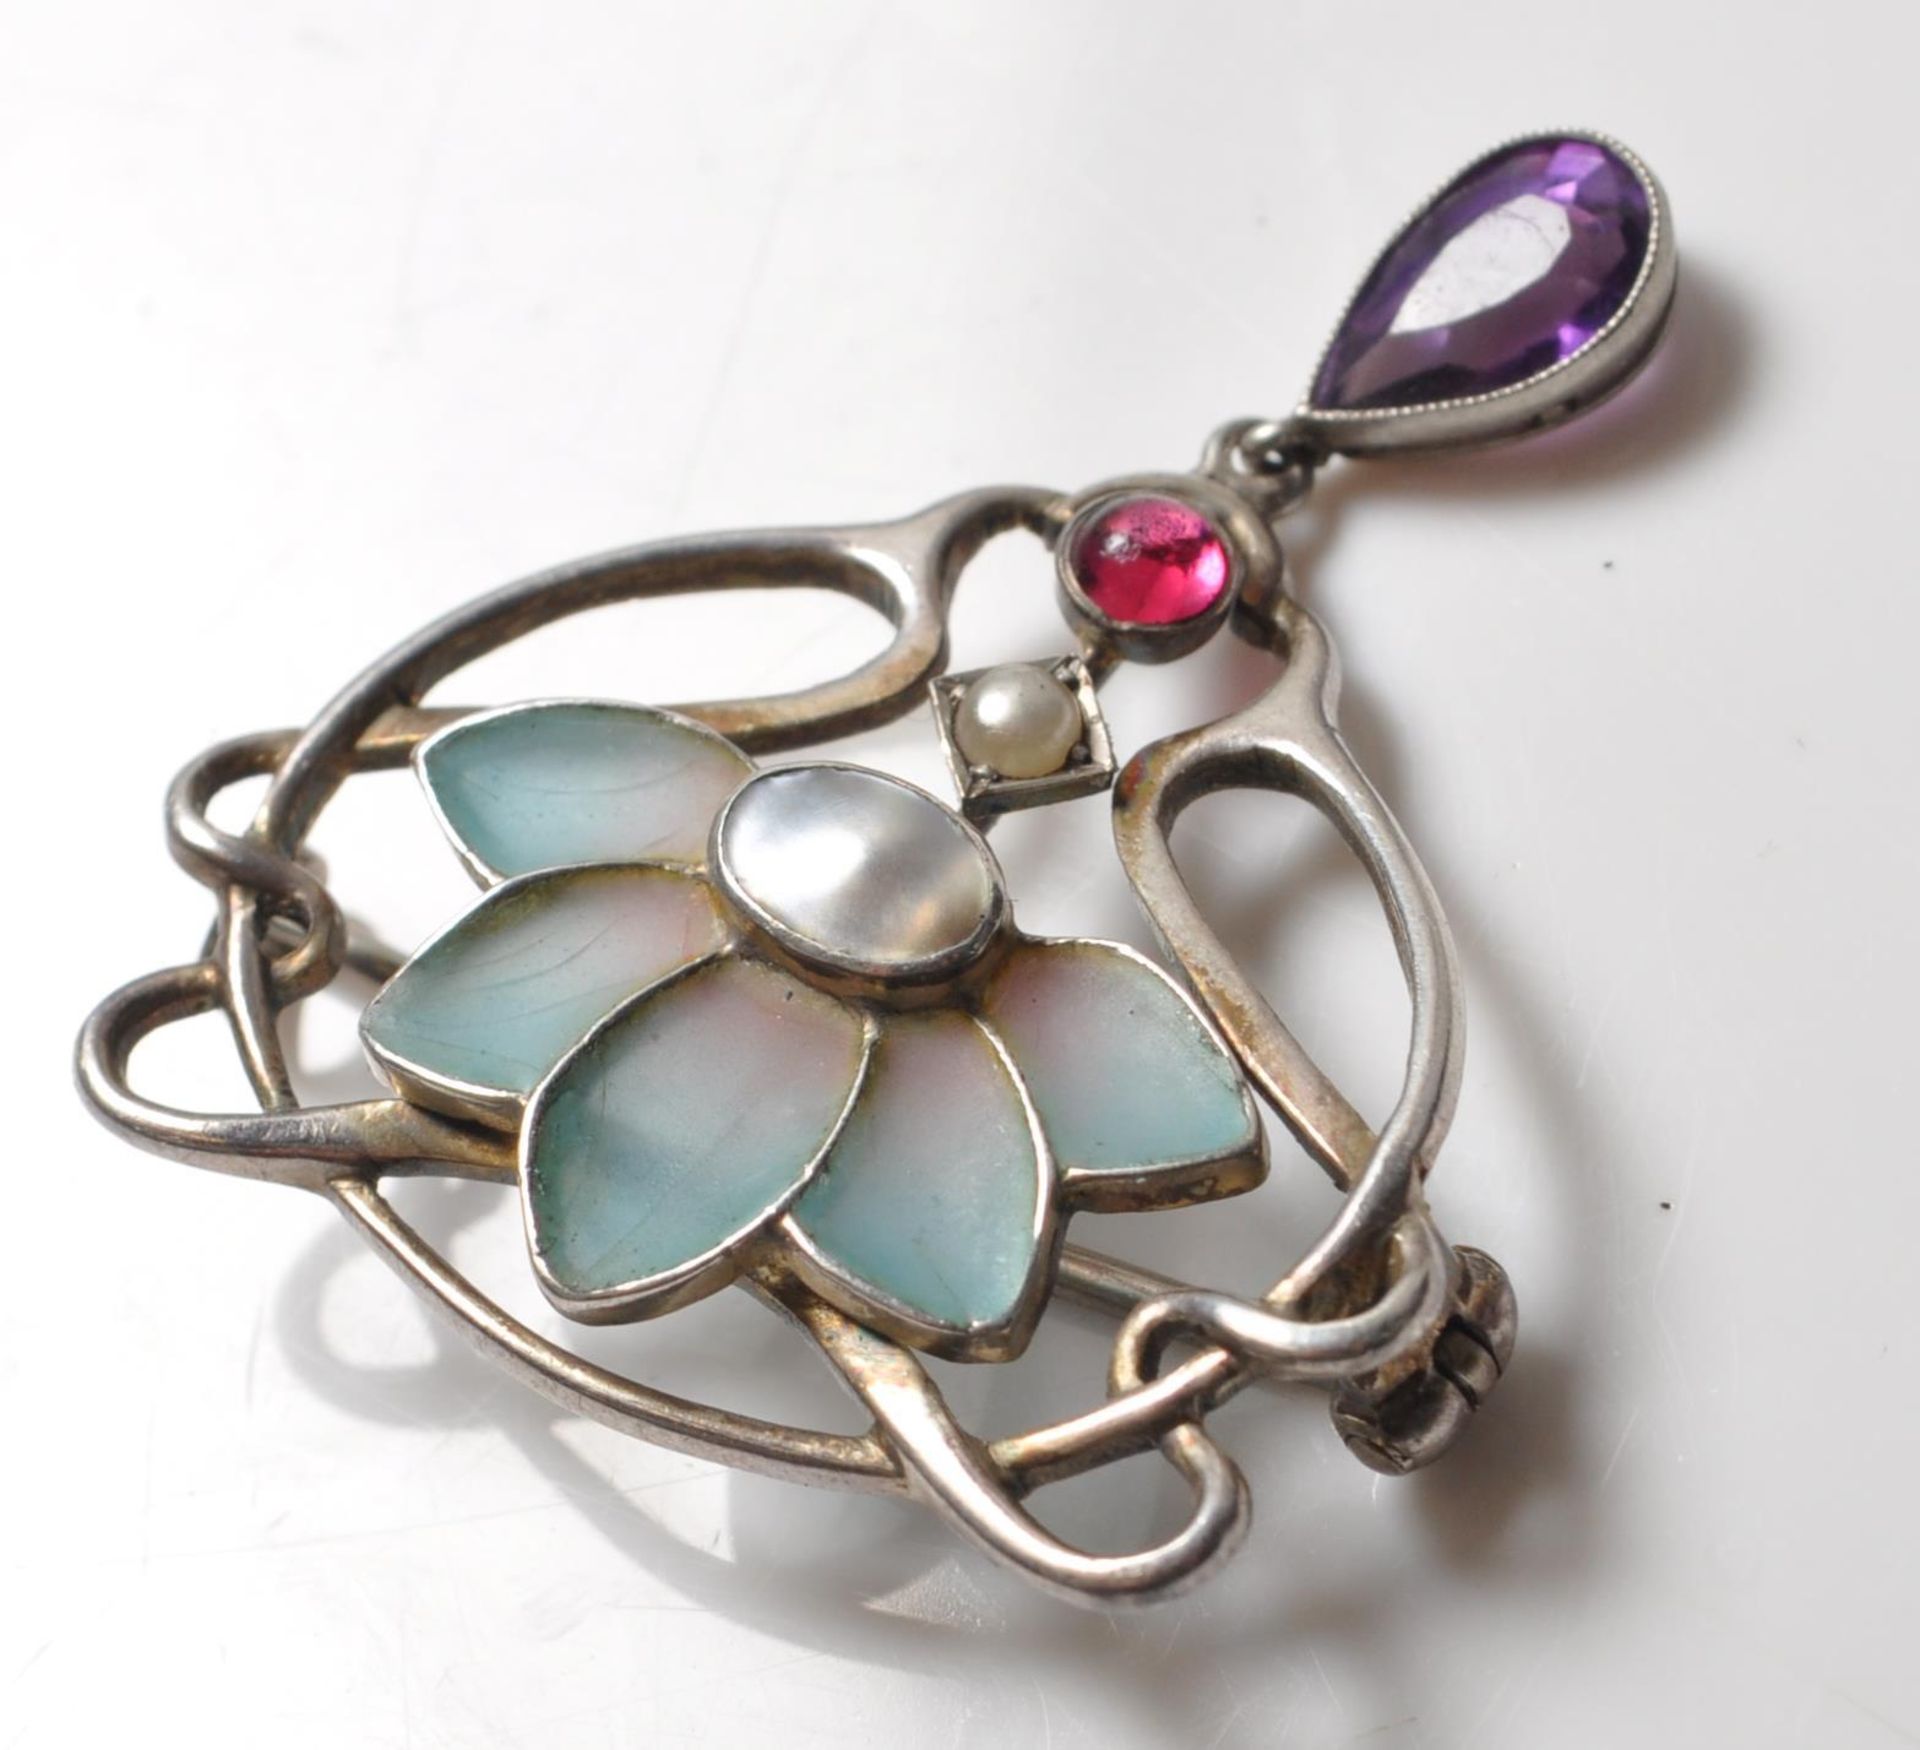 ART NOUVEAU SILVER AND PILQIE A JOUR BROOCH - Image 2 of 6